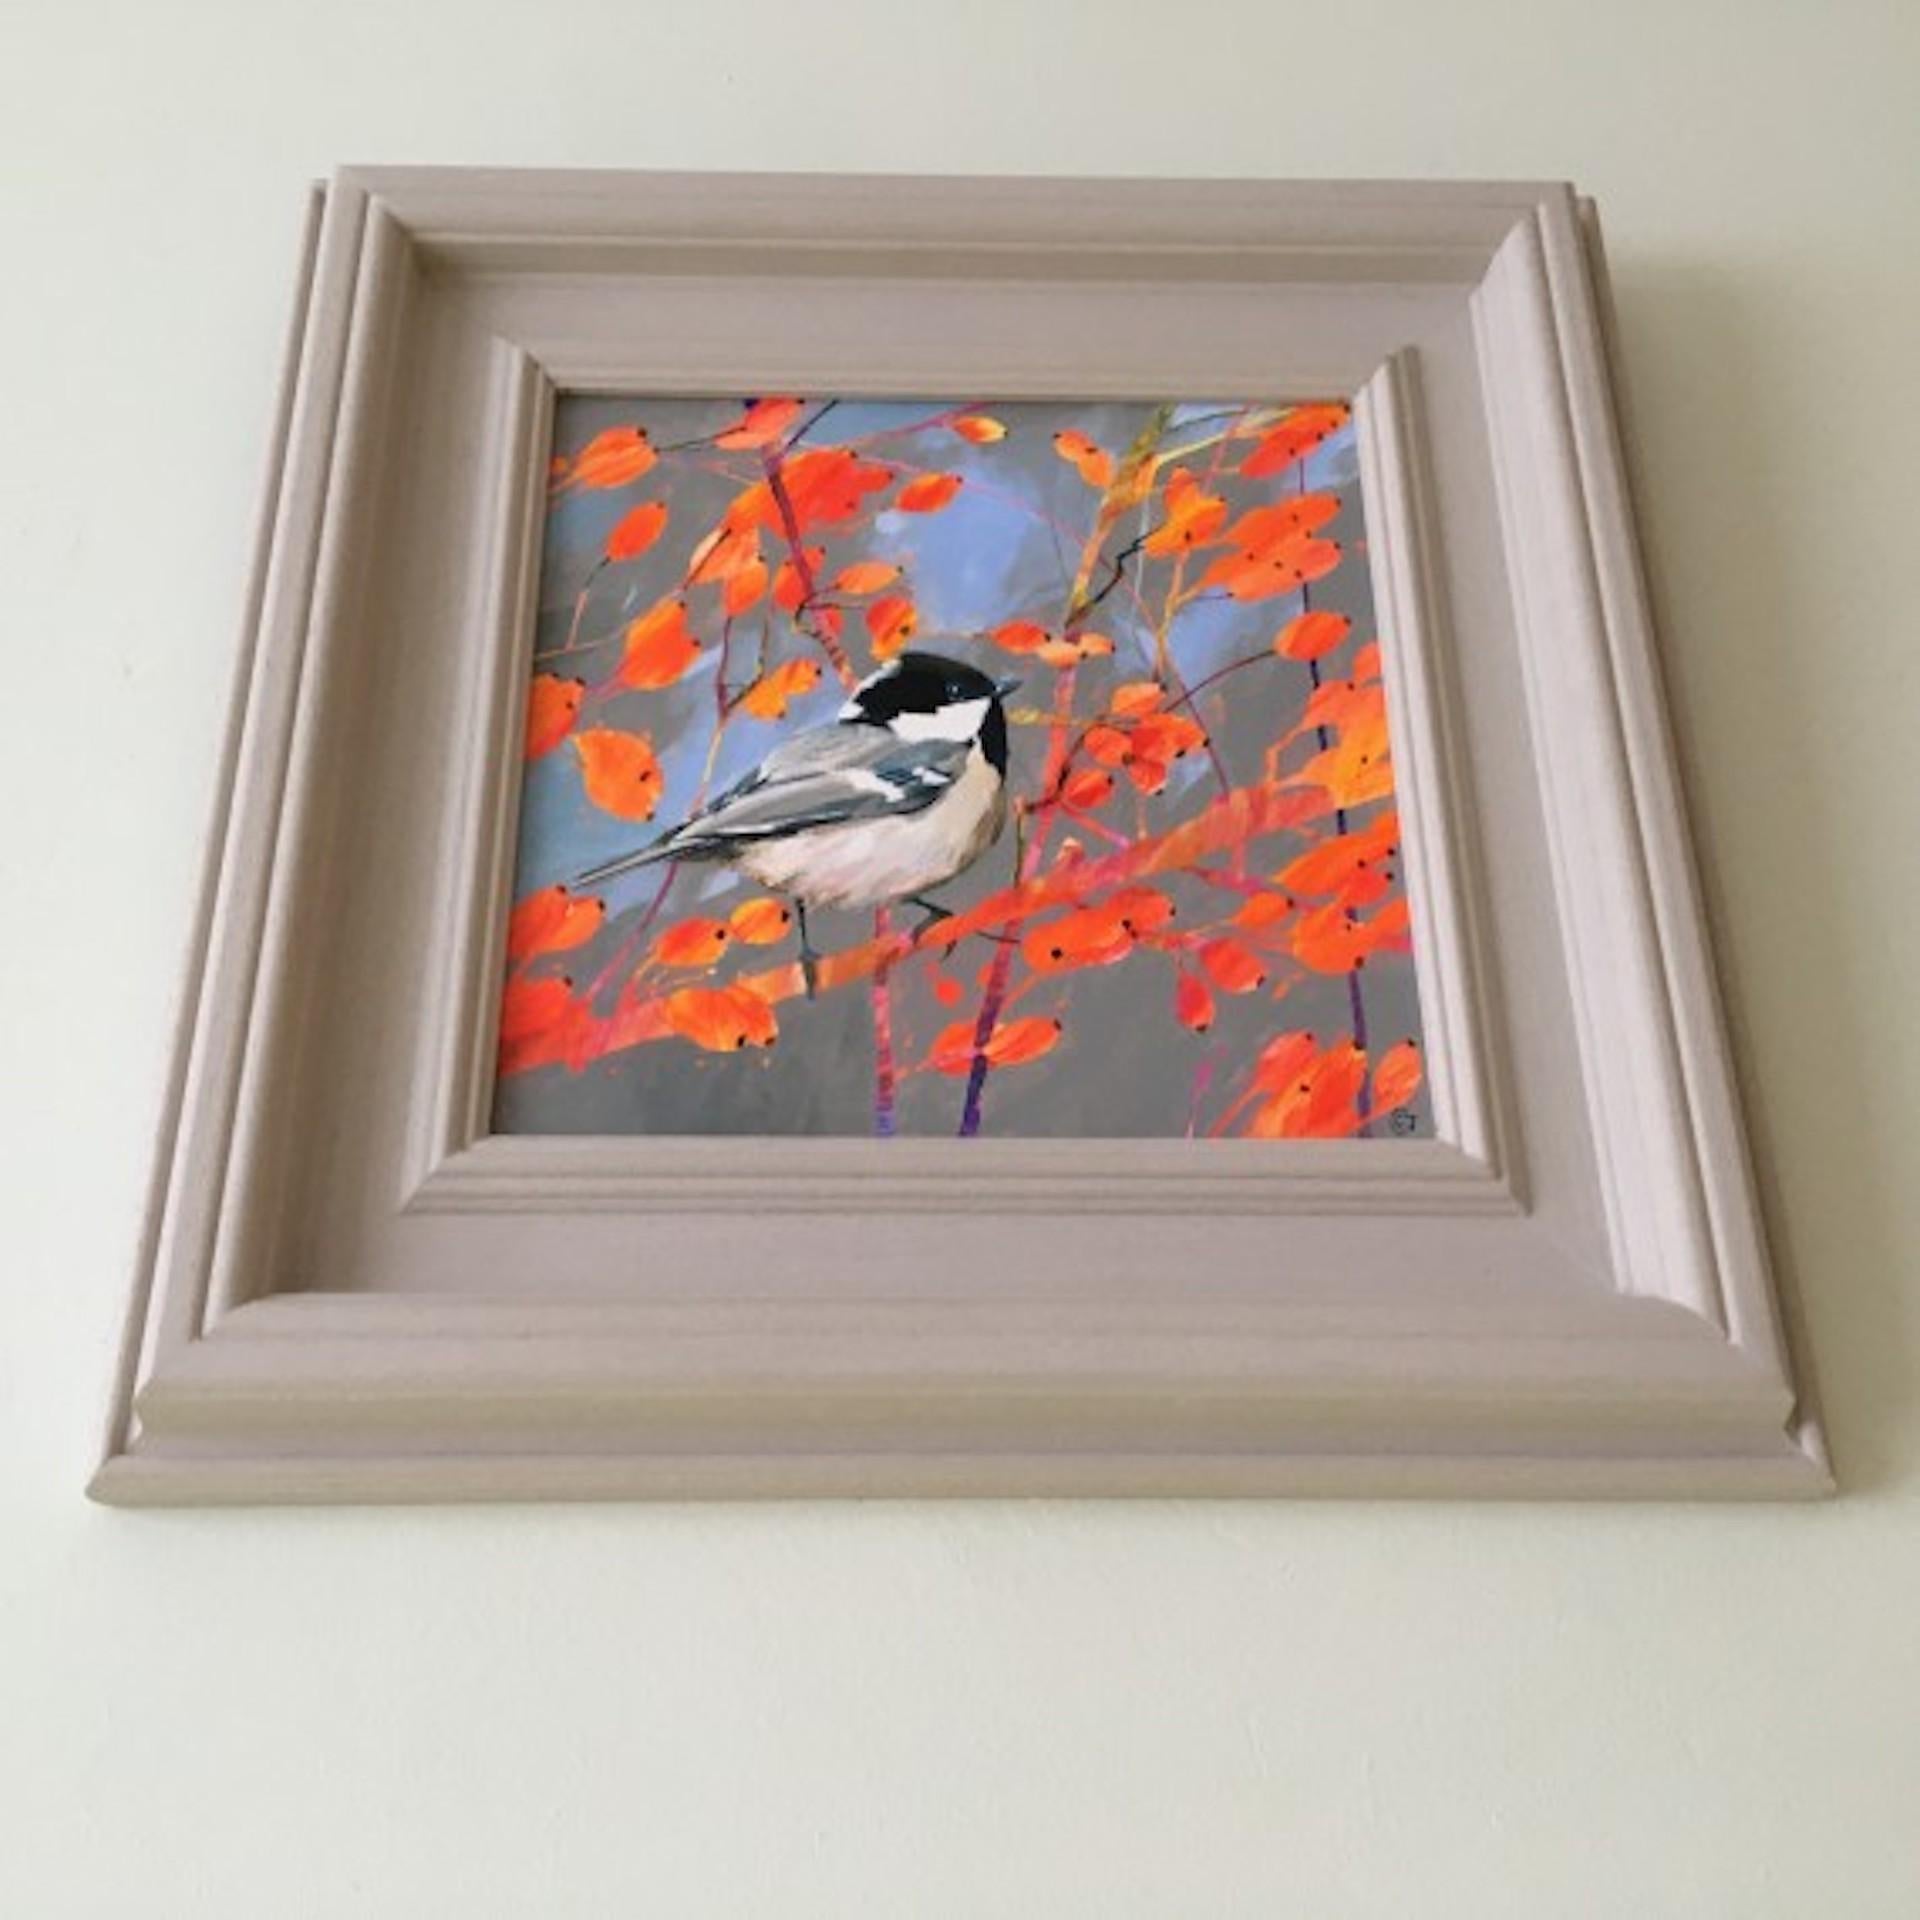 Coal Tit [2021]
Original
Figurative
Acrylic on Board
Framed Size: H:36 cm x W:36 cm x D:4cm
Sold Framed
Please note that insitu images are purely an indication of how a piece may look

This original painting of a beautiful Coal Tit by Carolyn Carter